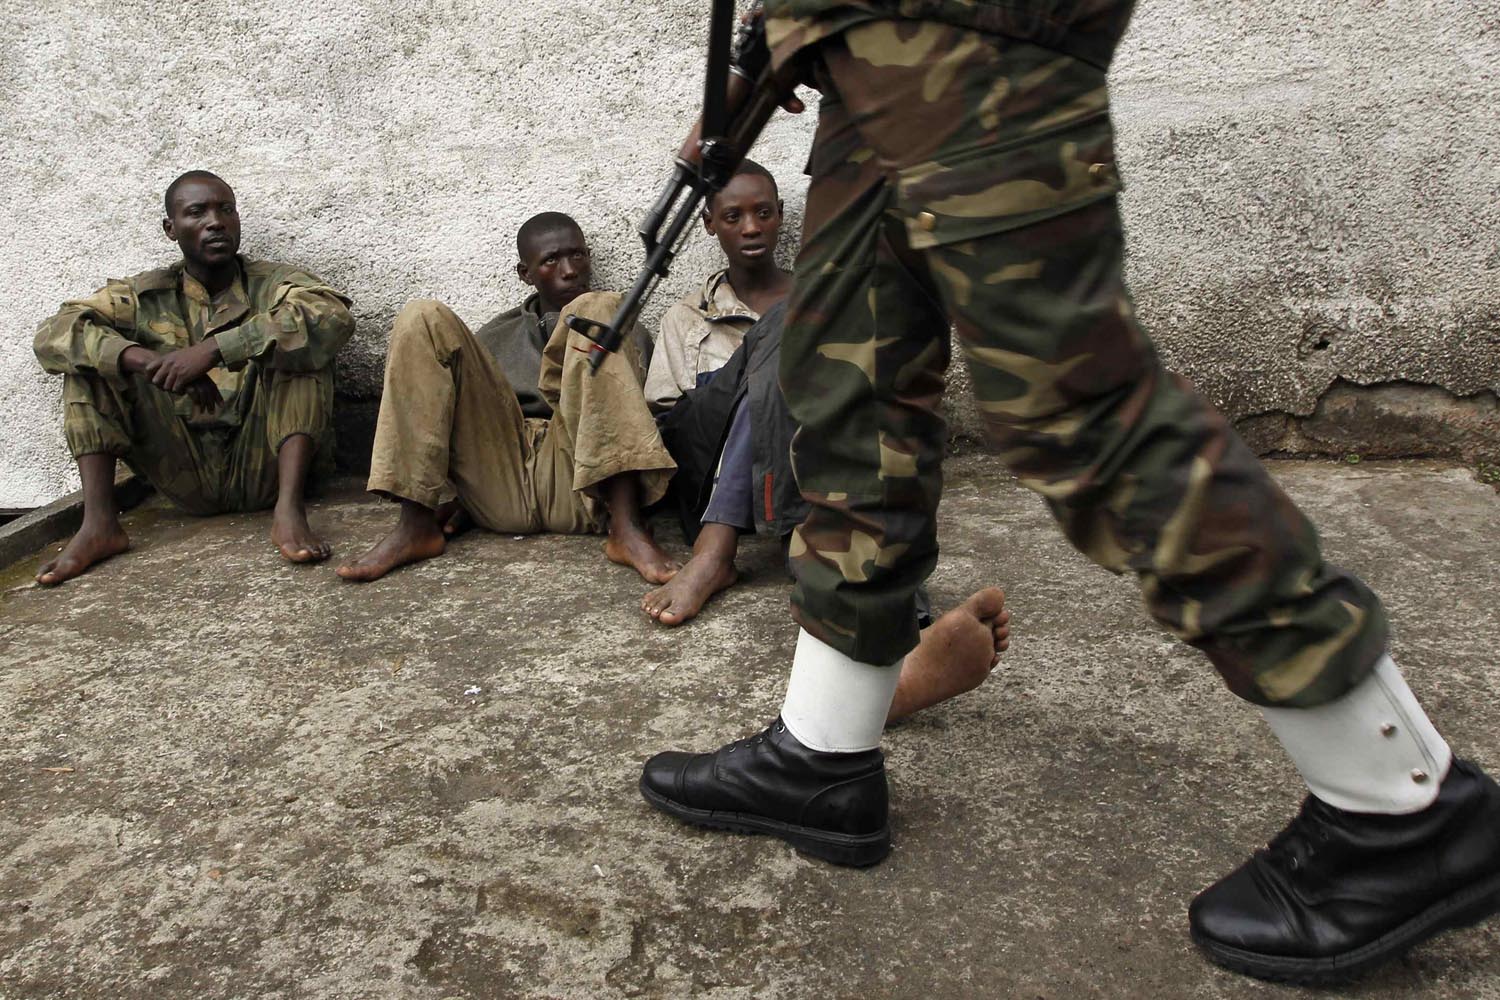 A Congolese soldier guards suspected rebels arrested during an operation against M23 rebels in Goma